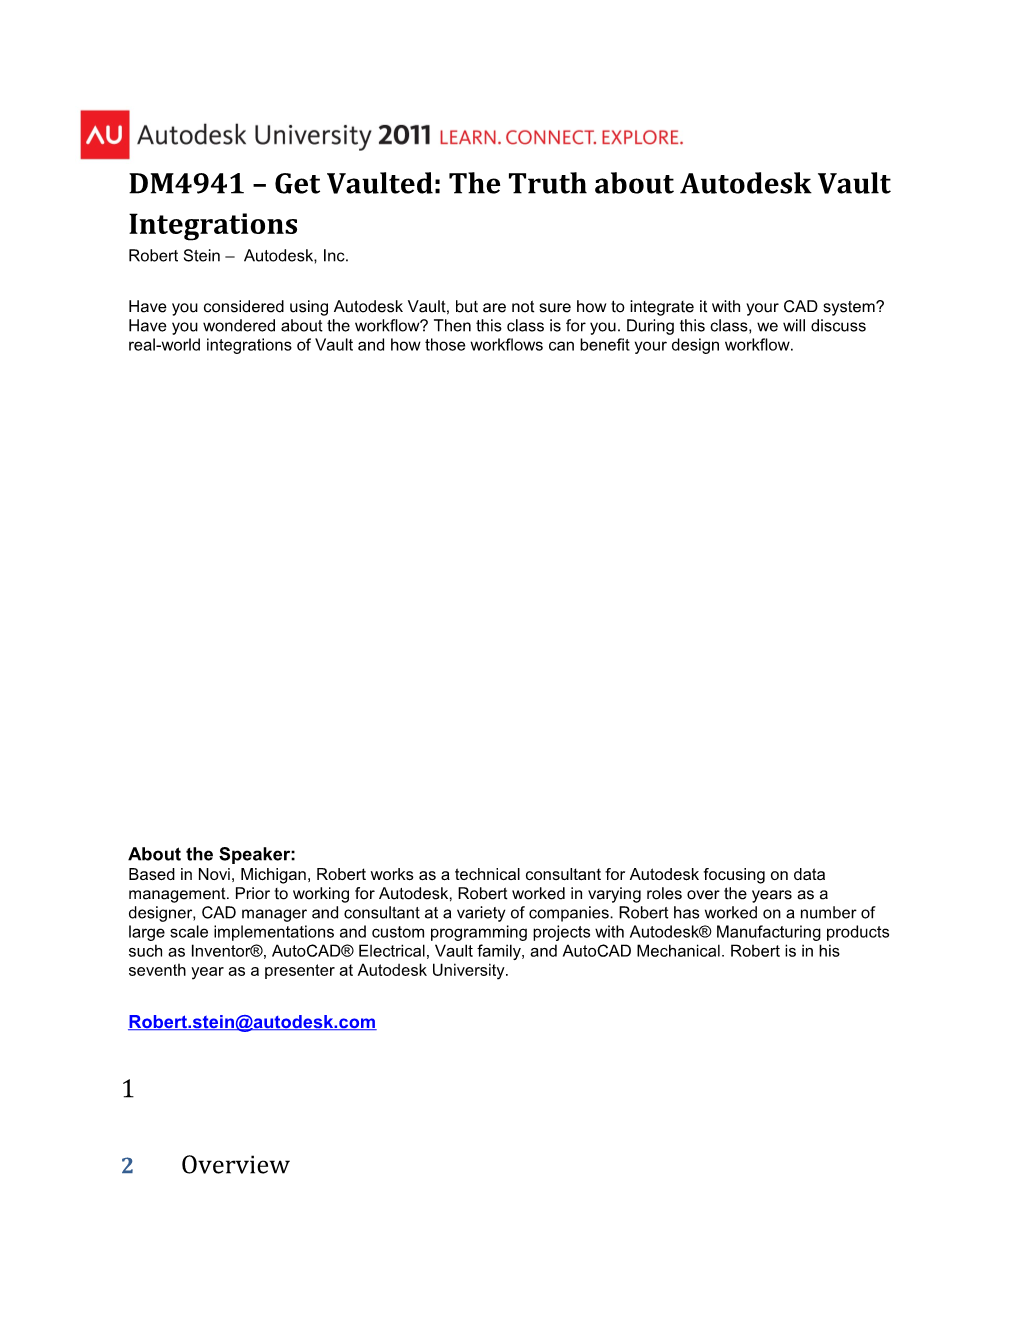 DM4941 Get Vaulted: the Truth About Autodesk Vault Integrations